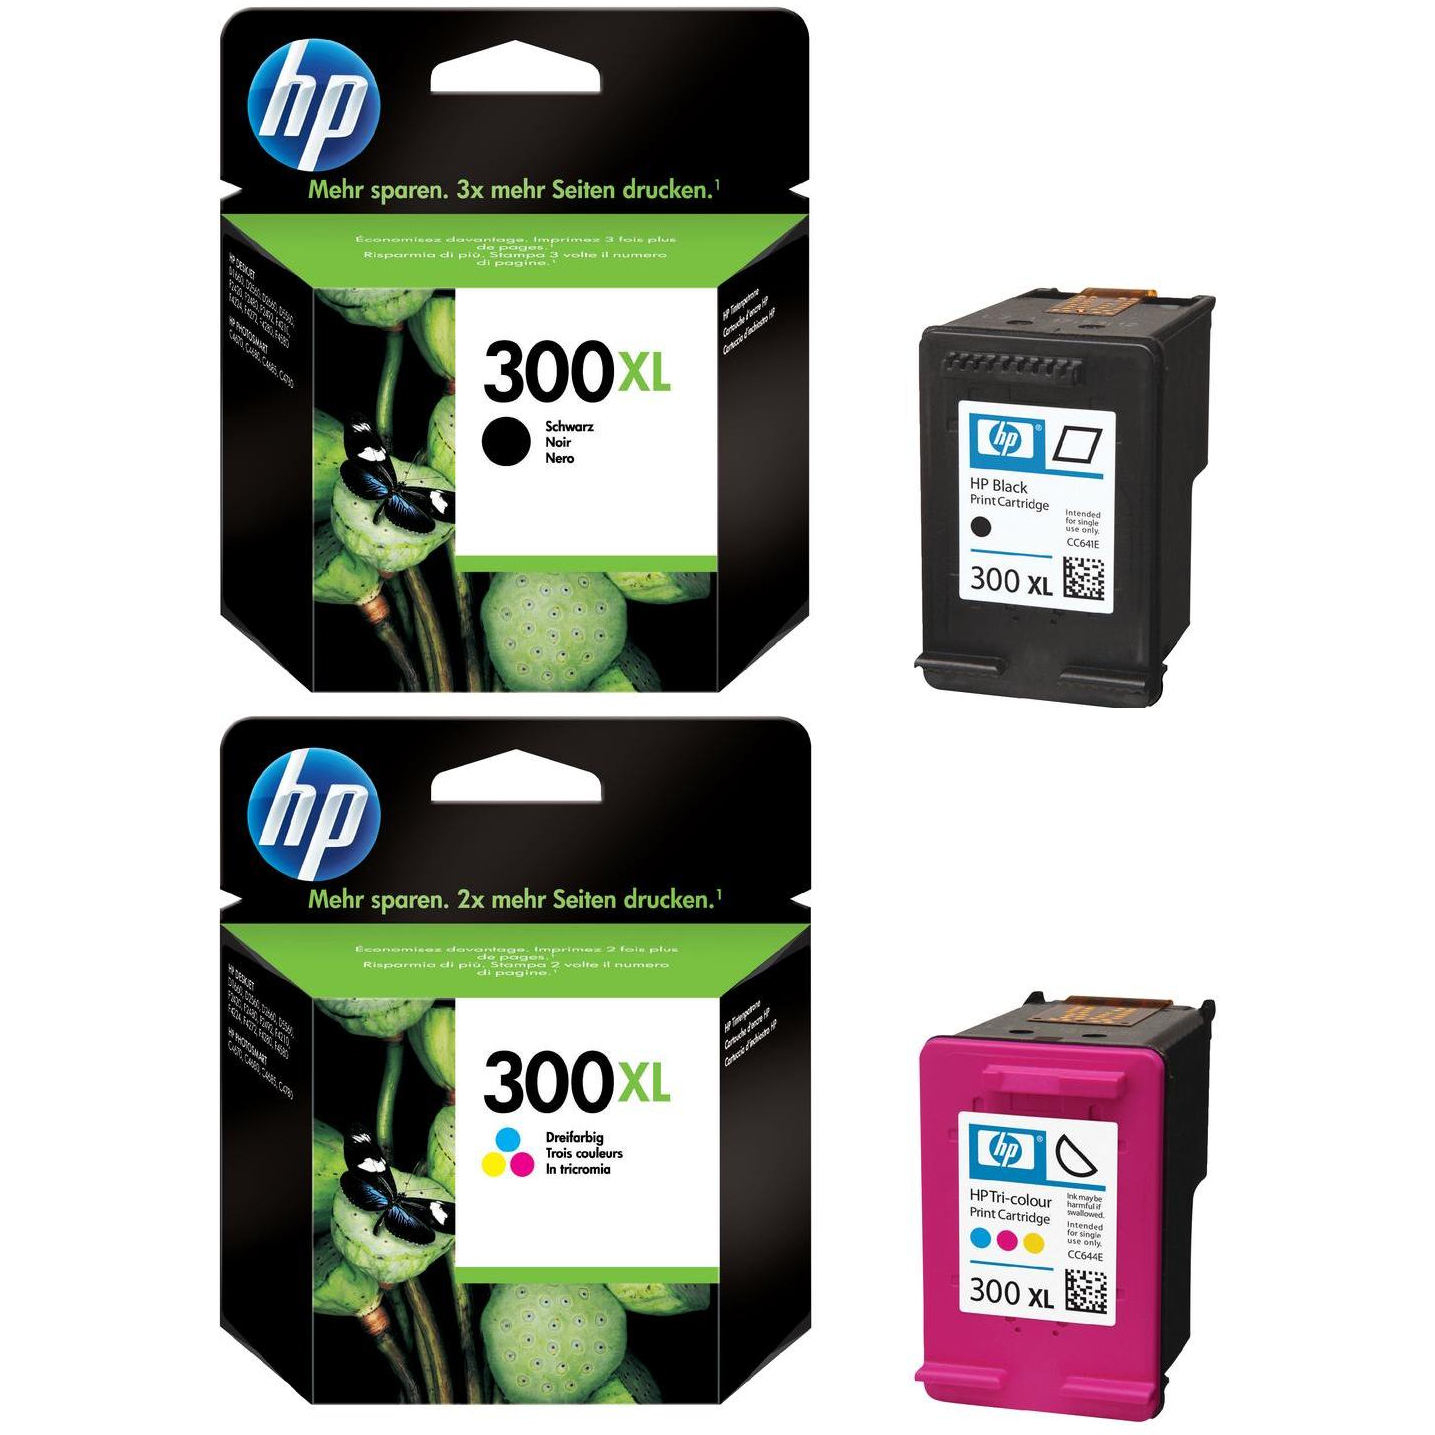 Related to HP OFFICEJET 635: HP-300XL-Pack